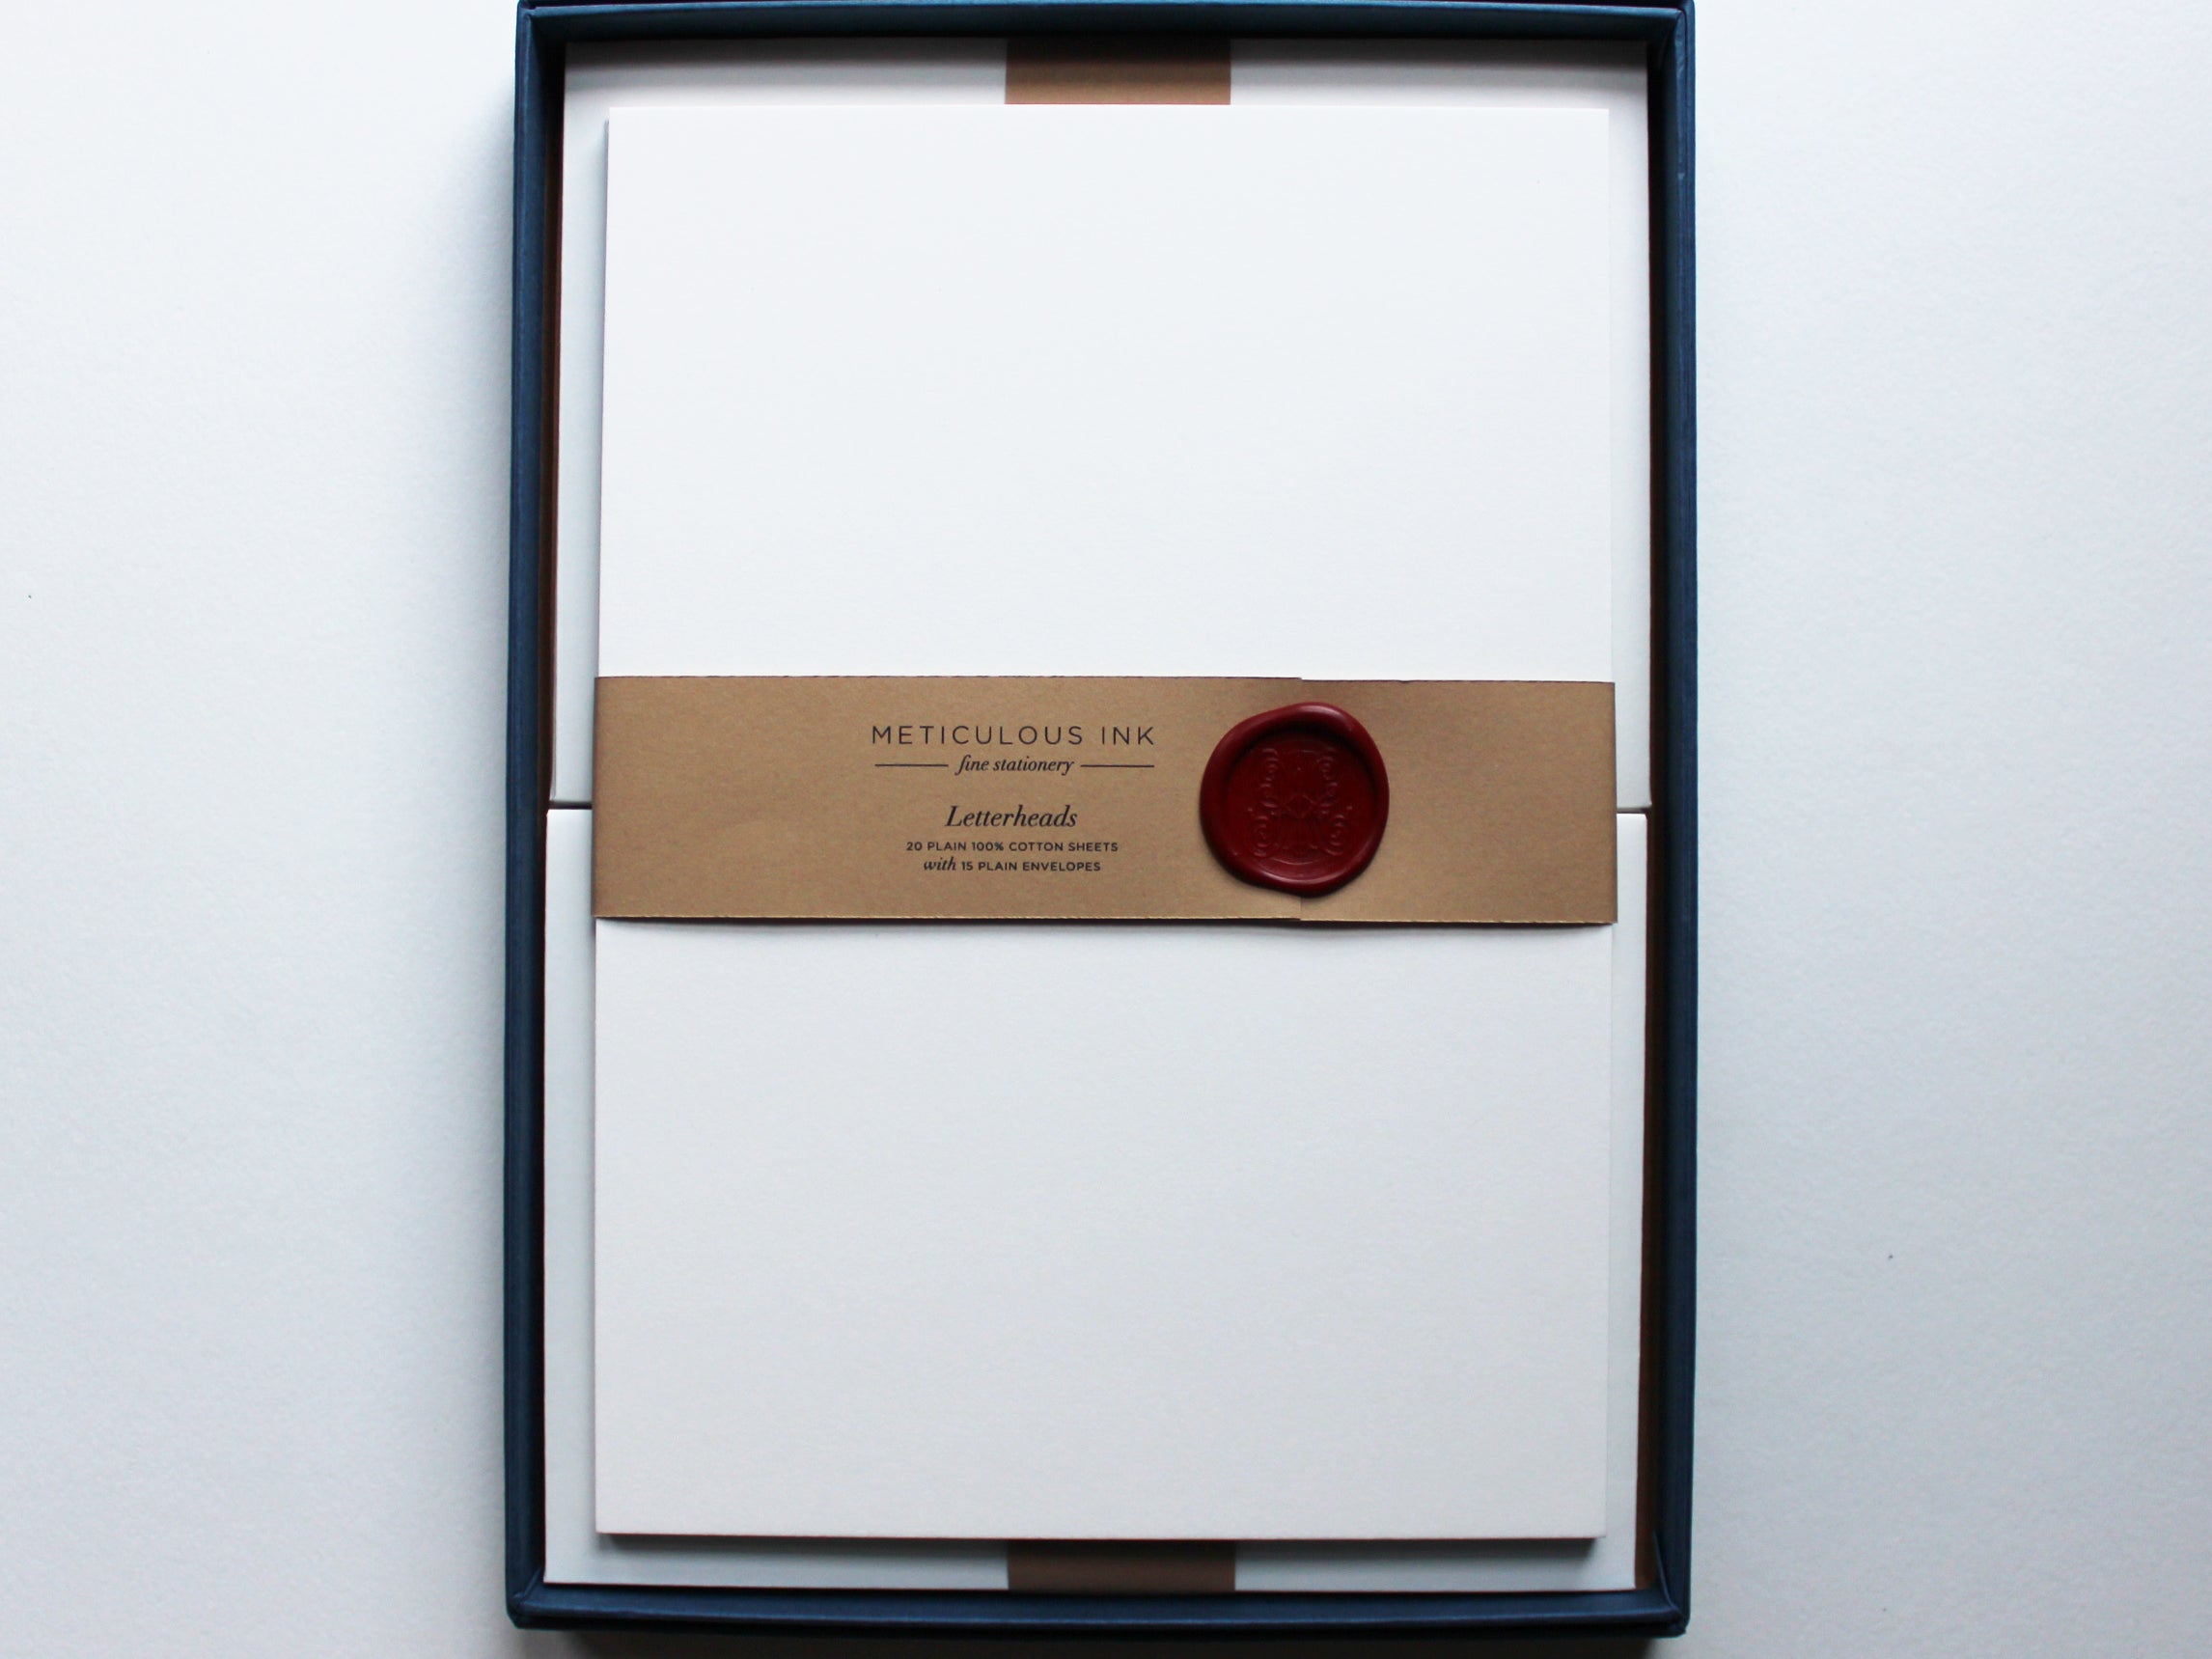 Plain Letterhead Writing Paper in display box with wax seal